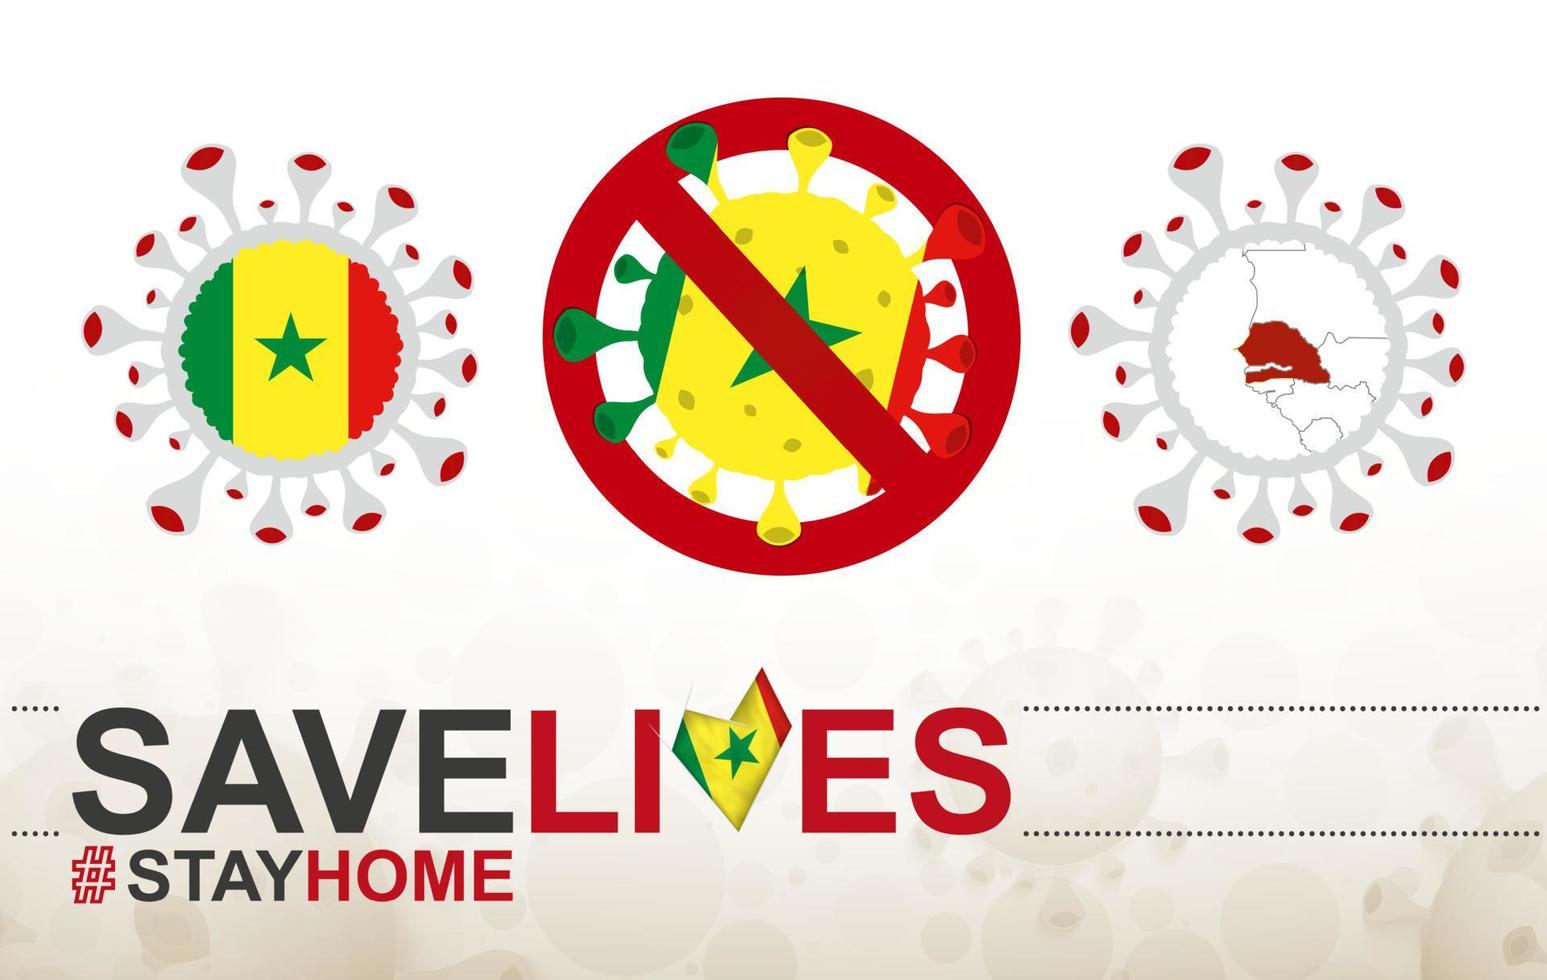 Coronavirus cell with Senegal flag and map. Stop COVID-19 sign, slogan save lives stay home with flag of Senegal vector